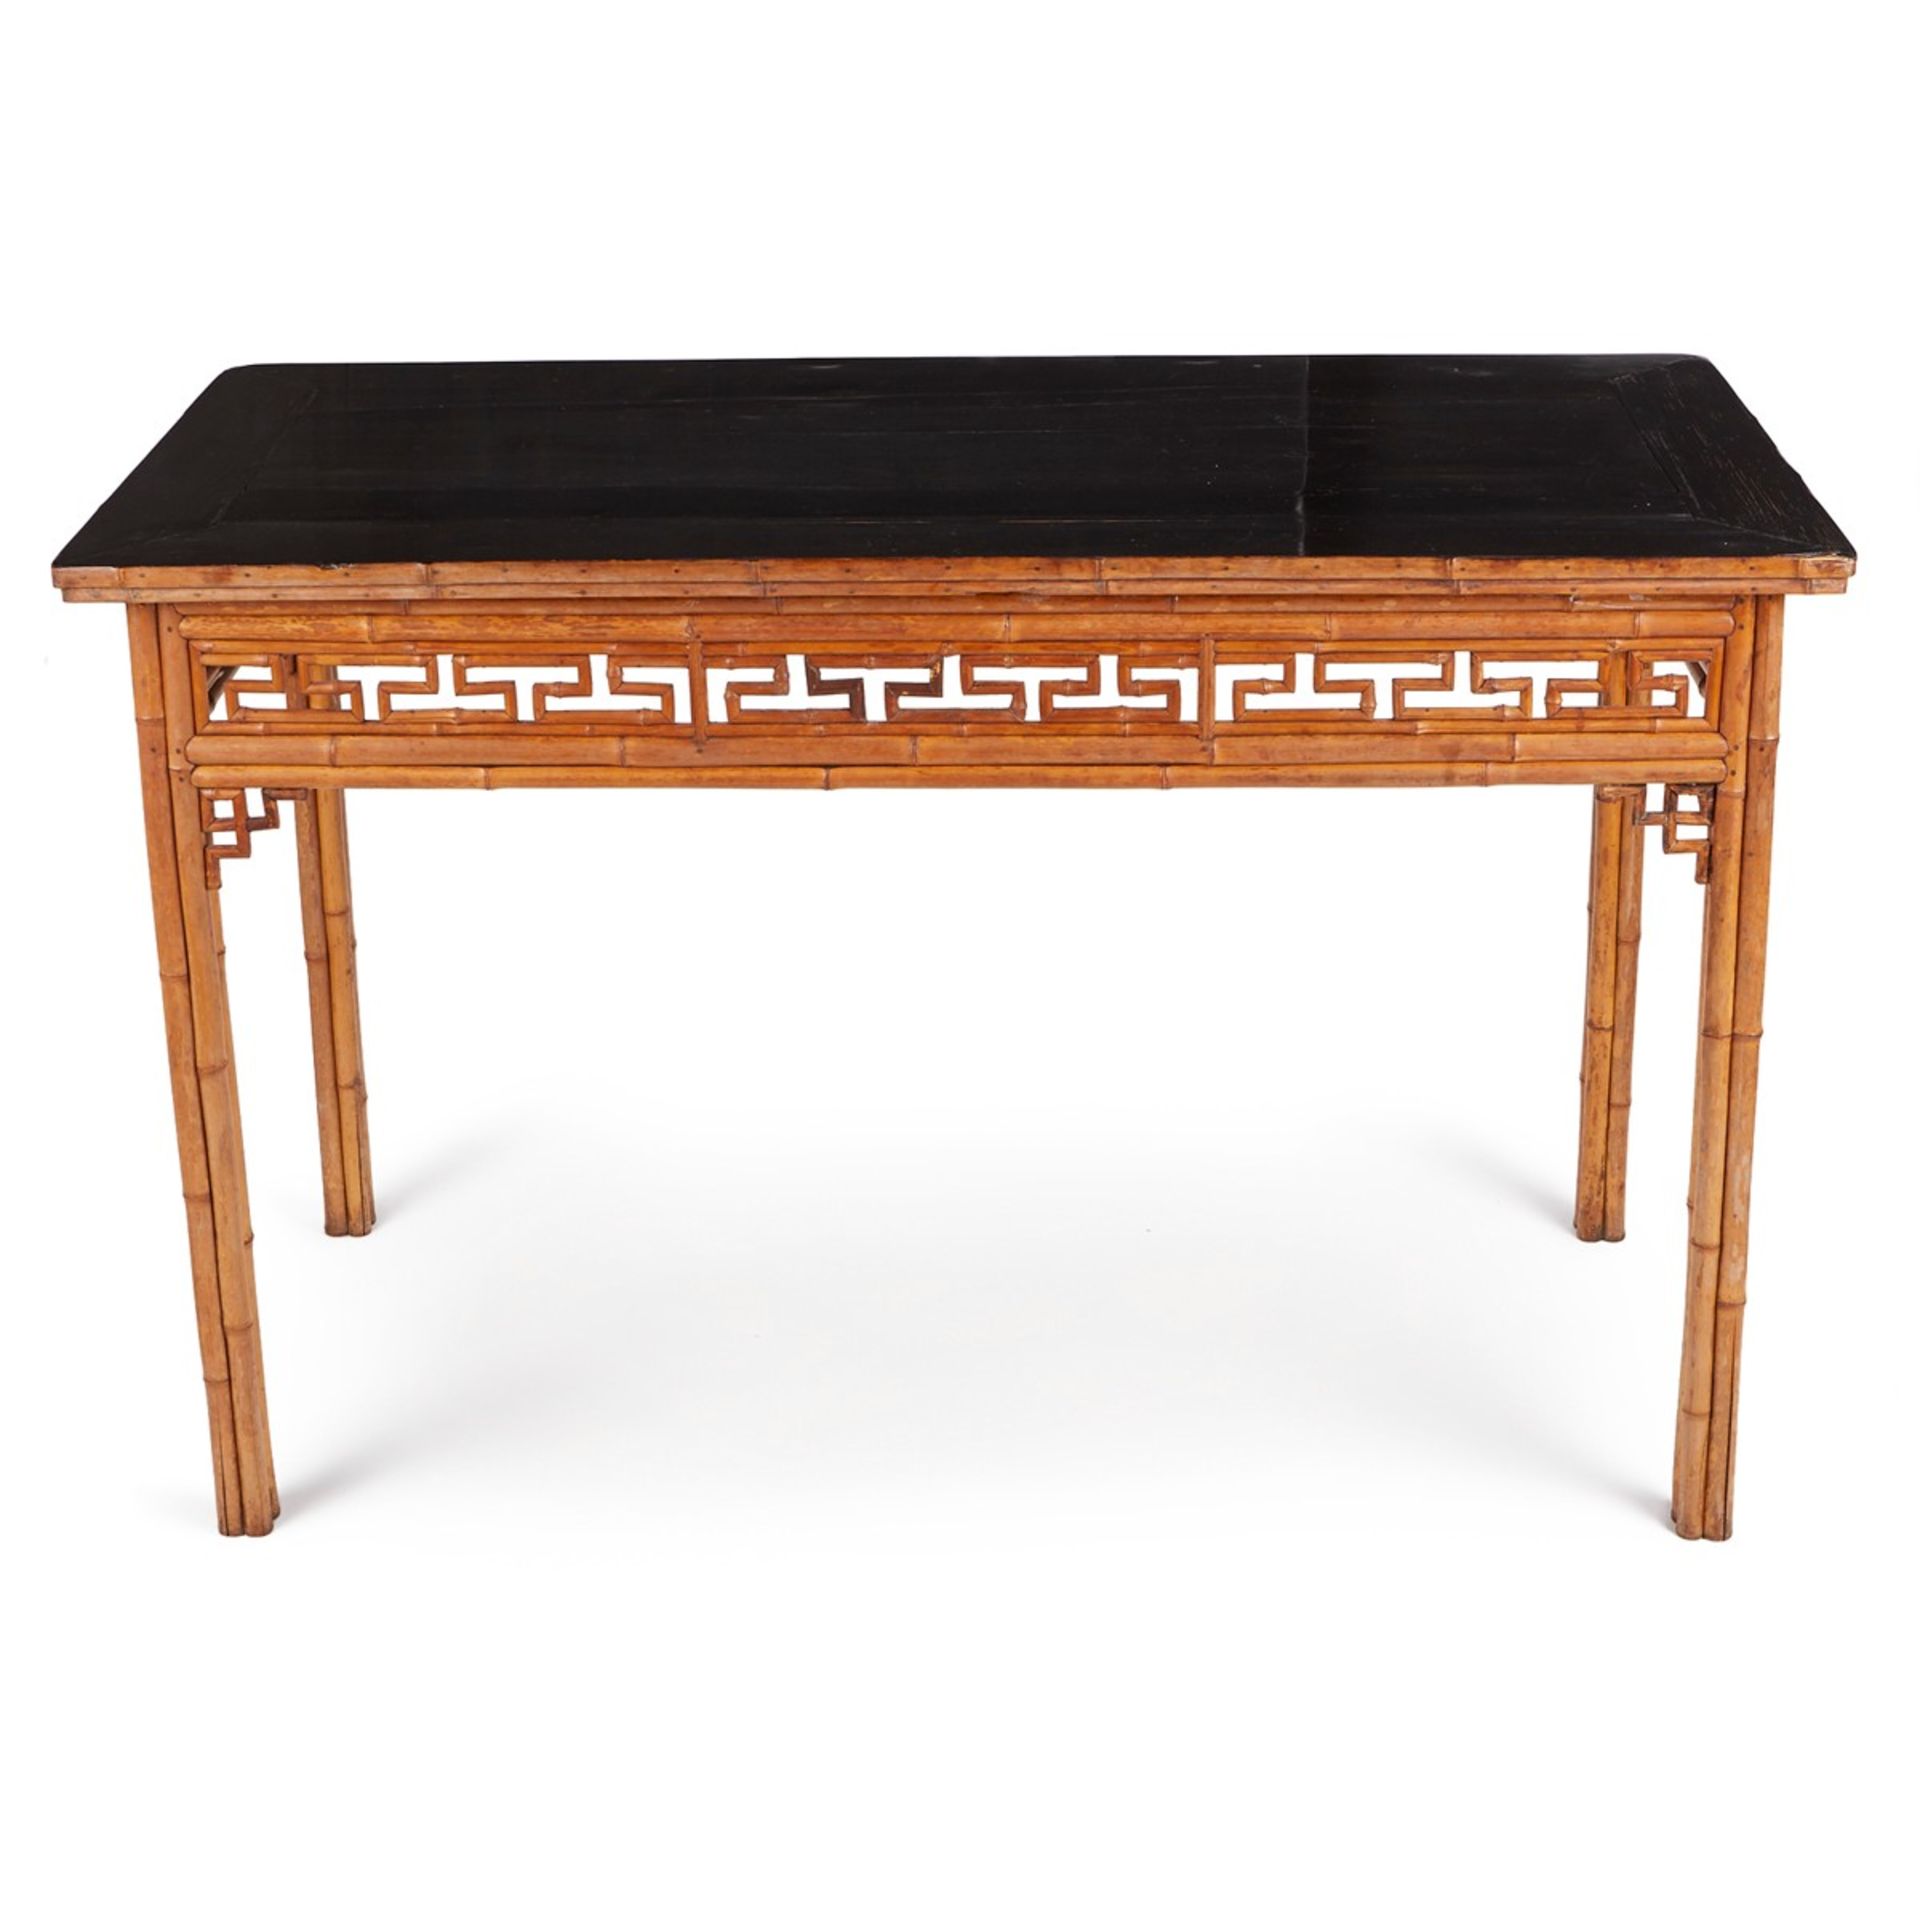 Chinese Bamboo Lacquer Rectangular Table - Image 2 of 7